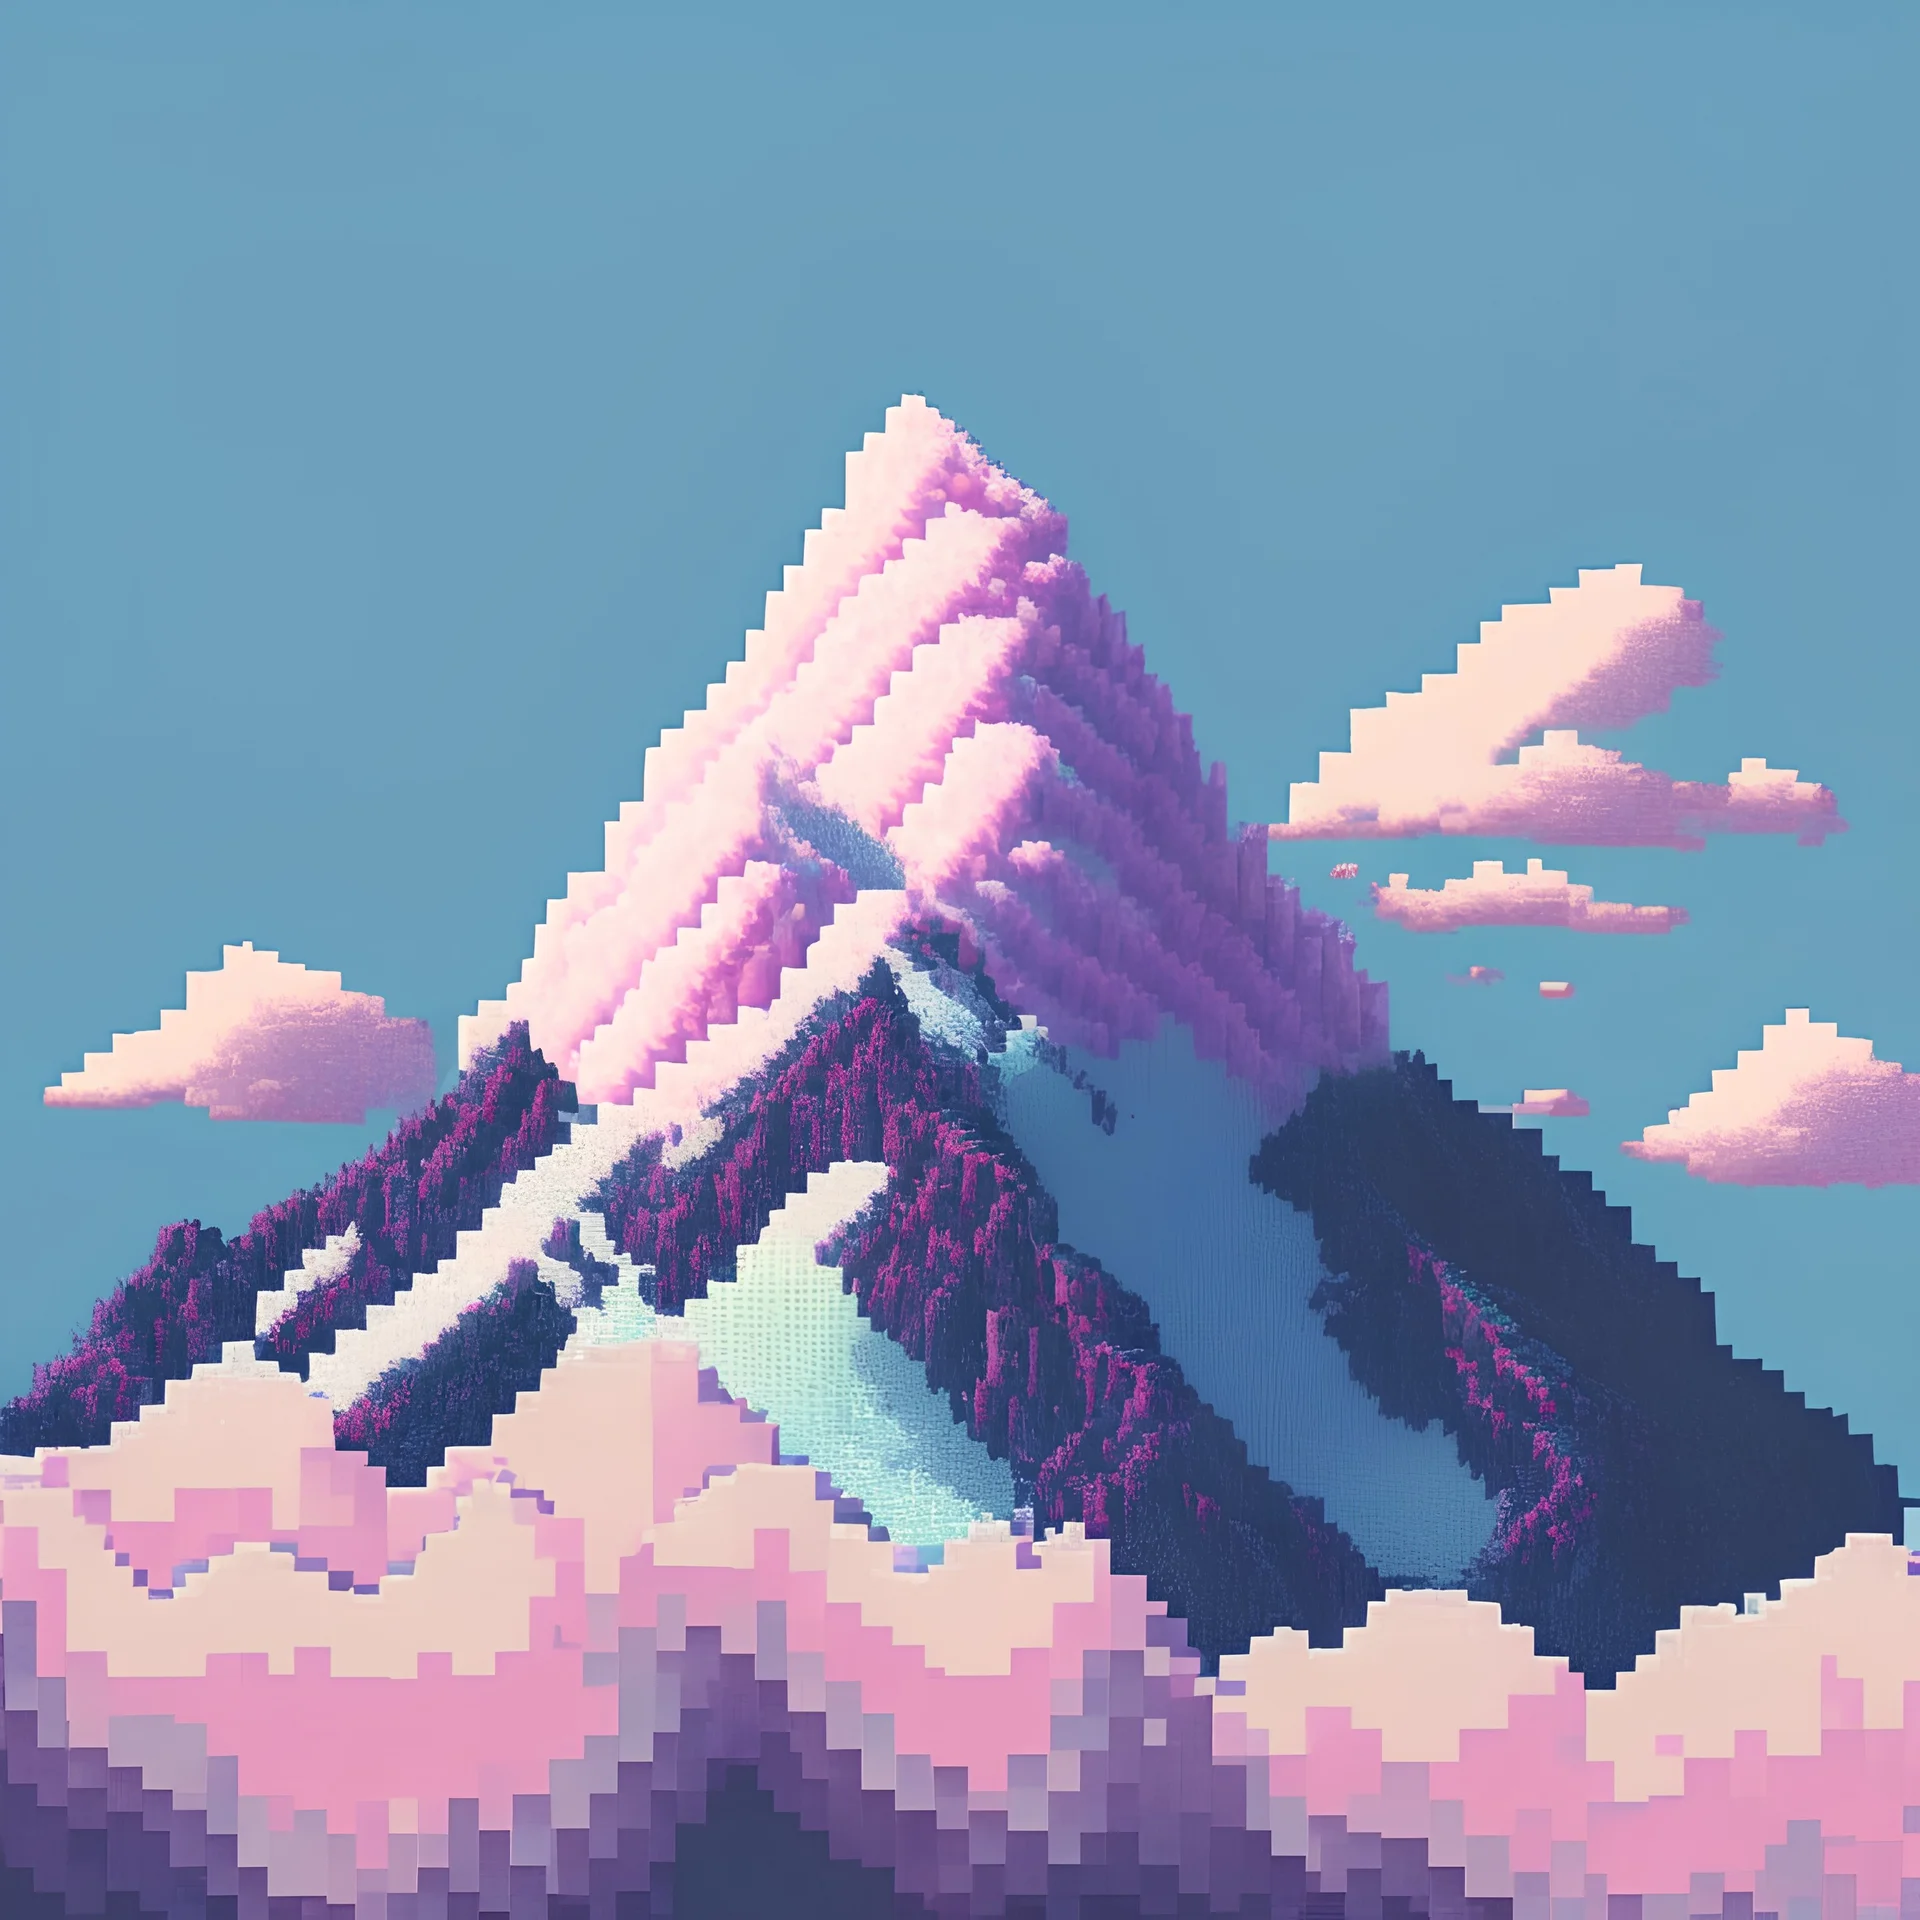 pixelated (16*16 pixels) image of a small mountain (which barely covers 25% of the image) and cotton candy colour sky